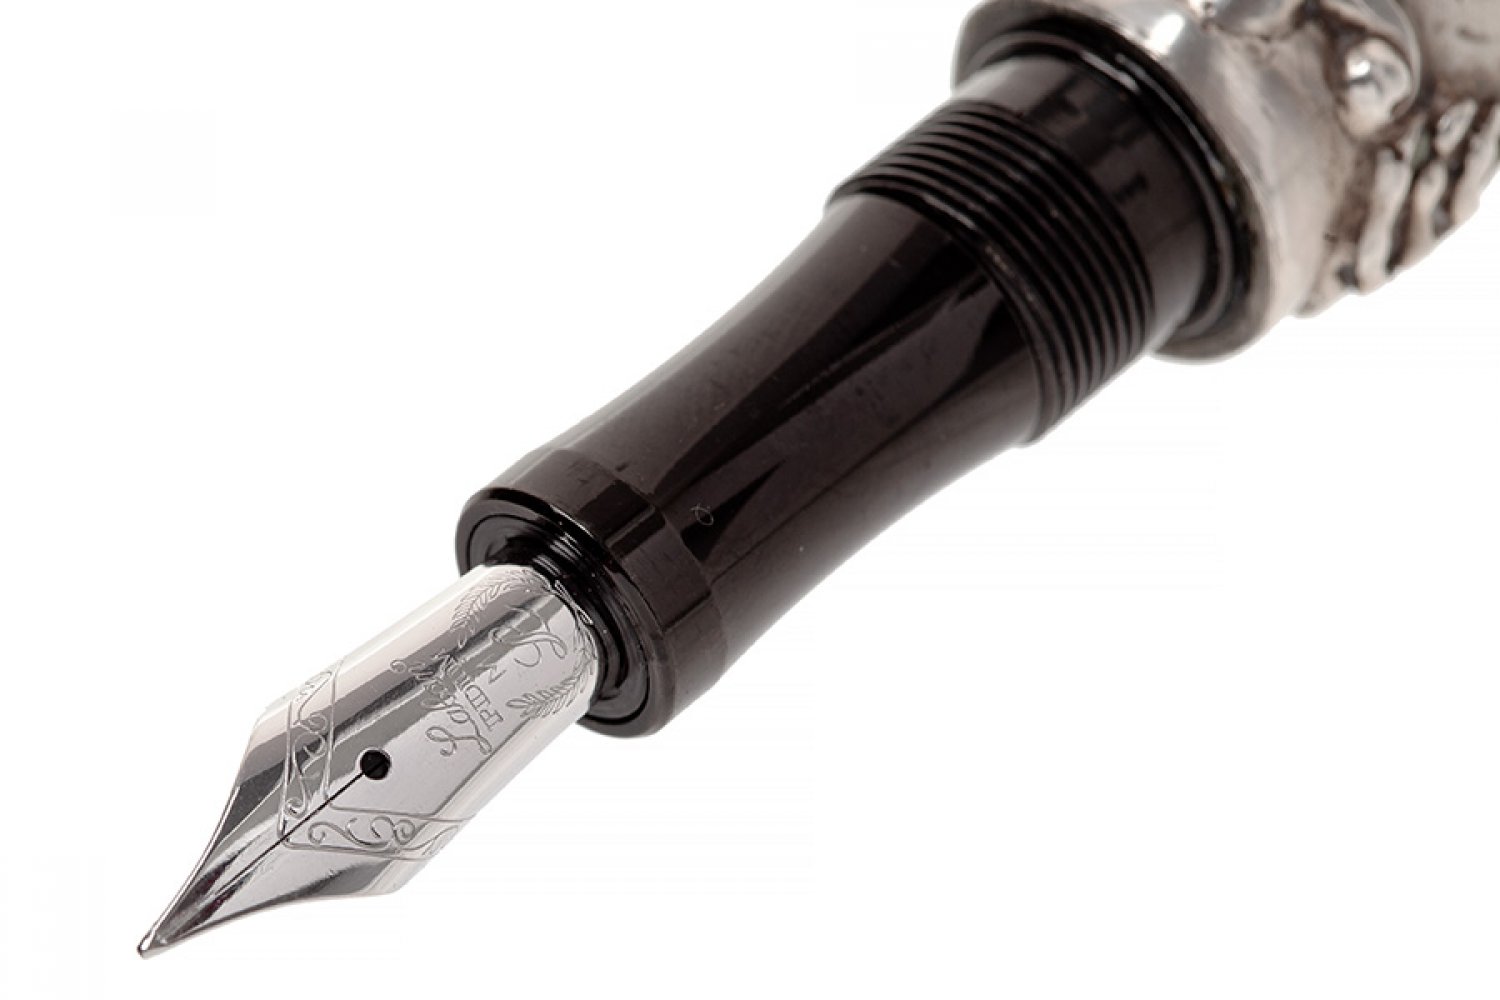 LABAN FOUNTAIN PEN.Barrel and cap in 925 sterling silver.Limited edition 64/800.Silver-plated nib, - Image 5 of 5